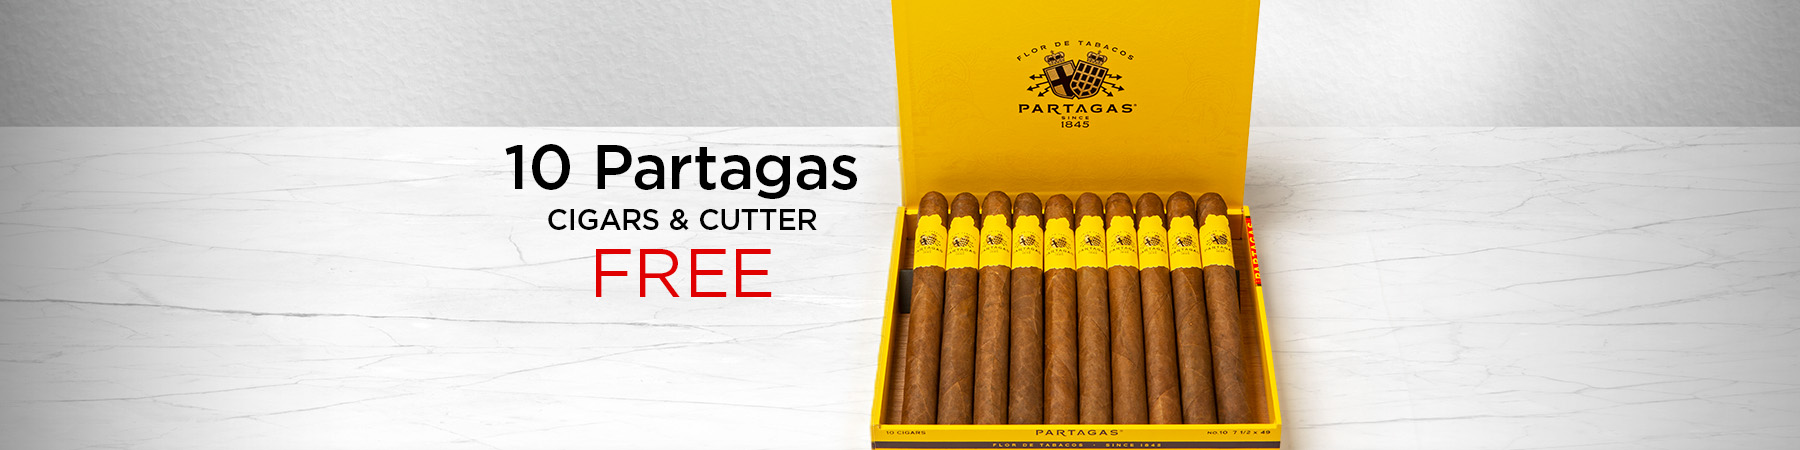 10 Partagas Cigars and Cutter Free